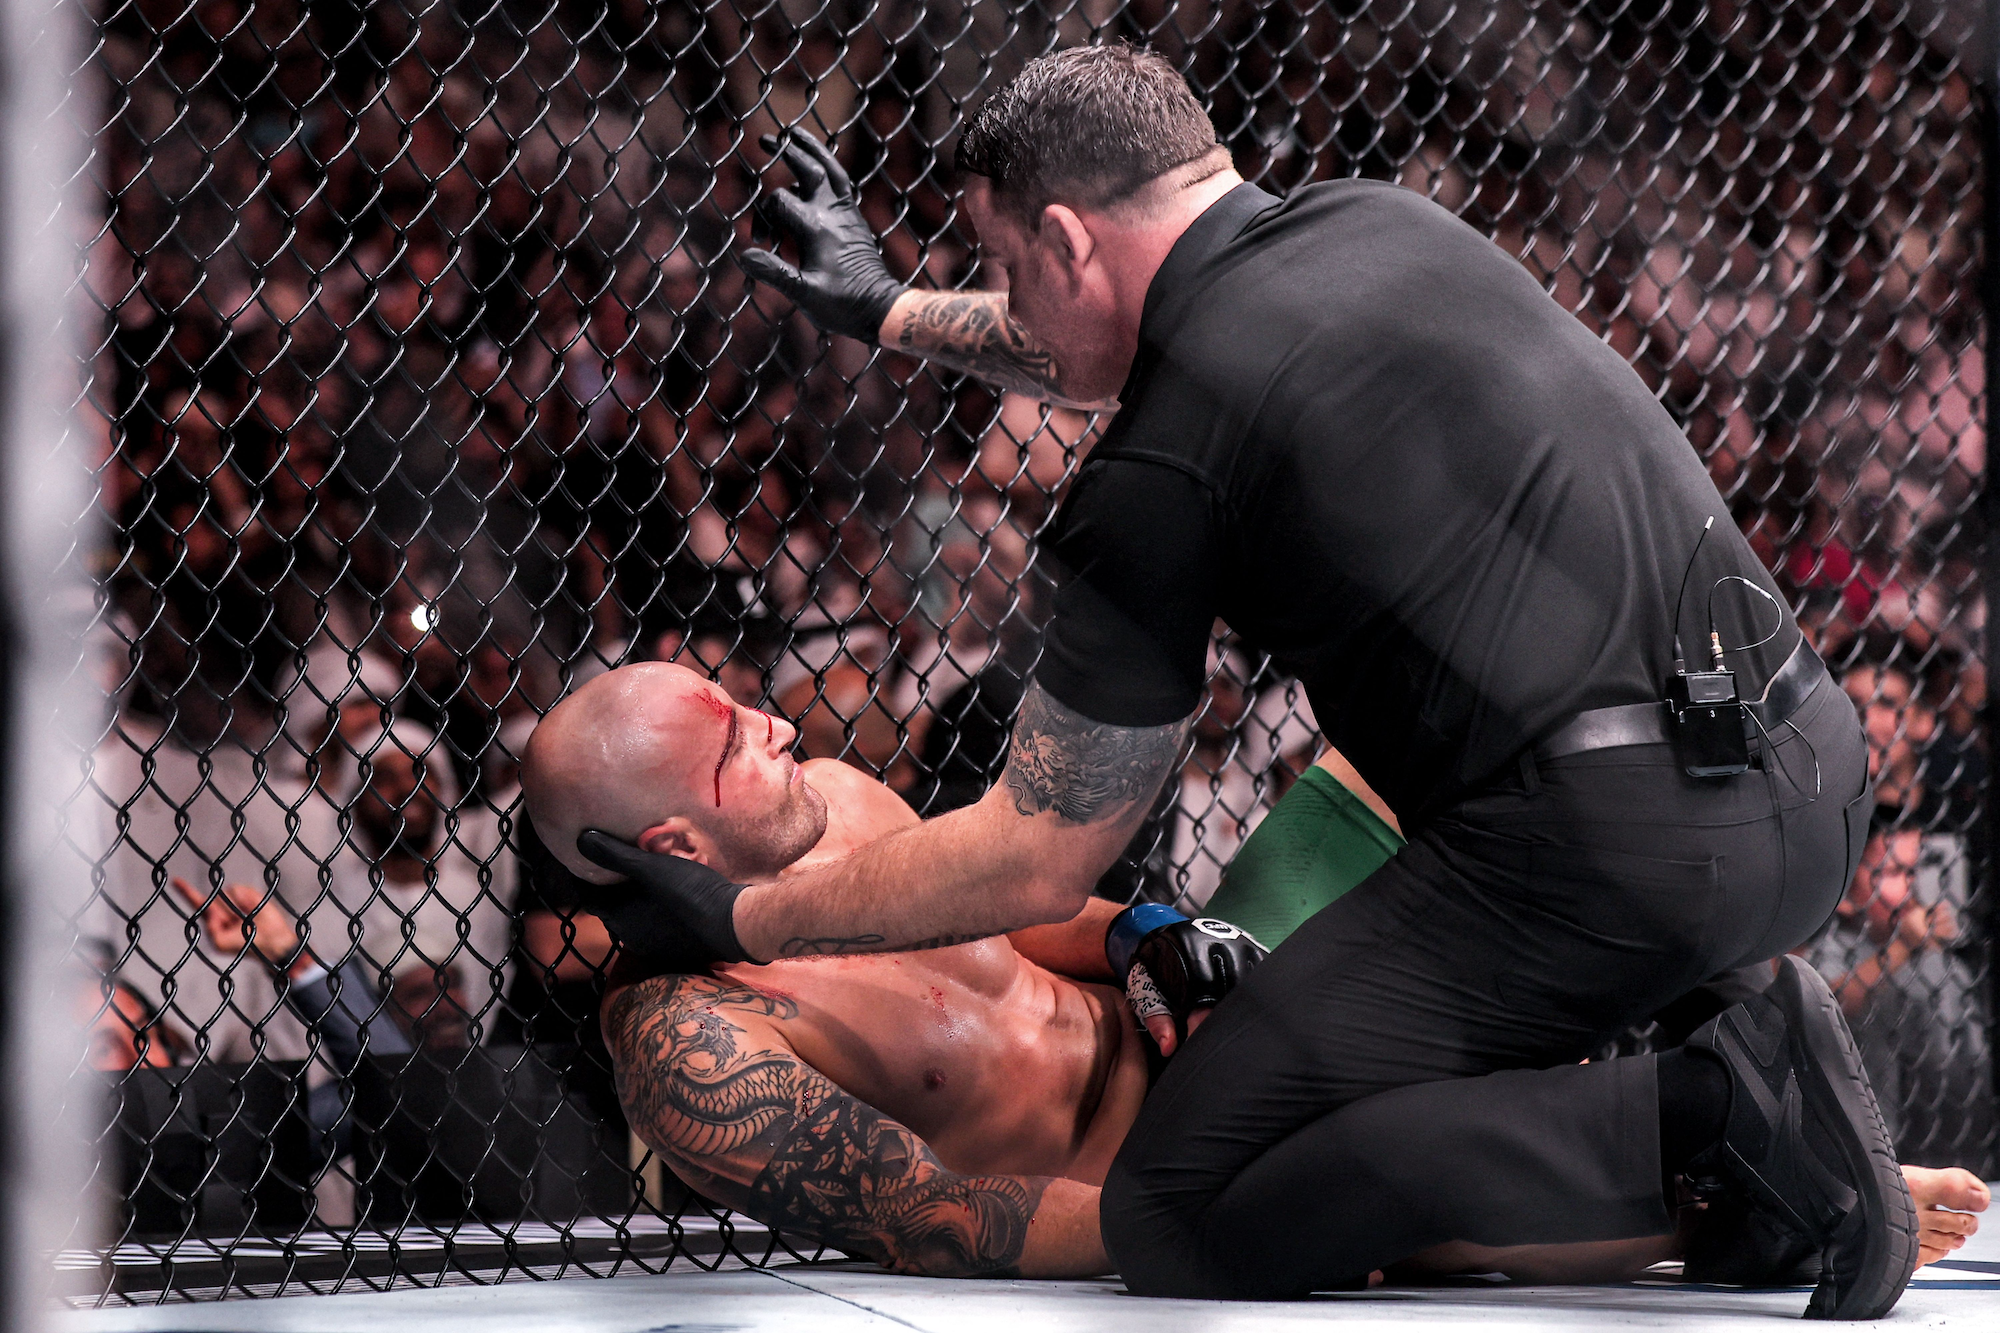 A UFC referee cradles the head of Alexander Volkanovski, crumpled against the fencing at the end of his match against Islam Makhachev